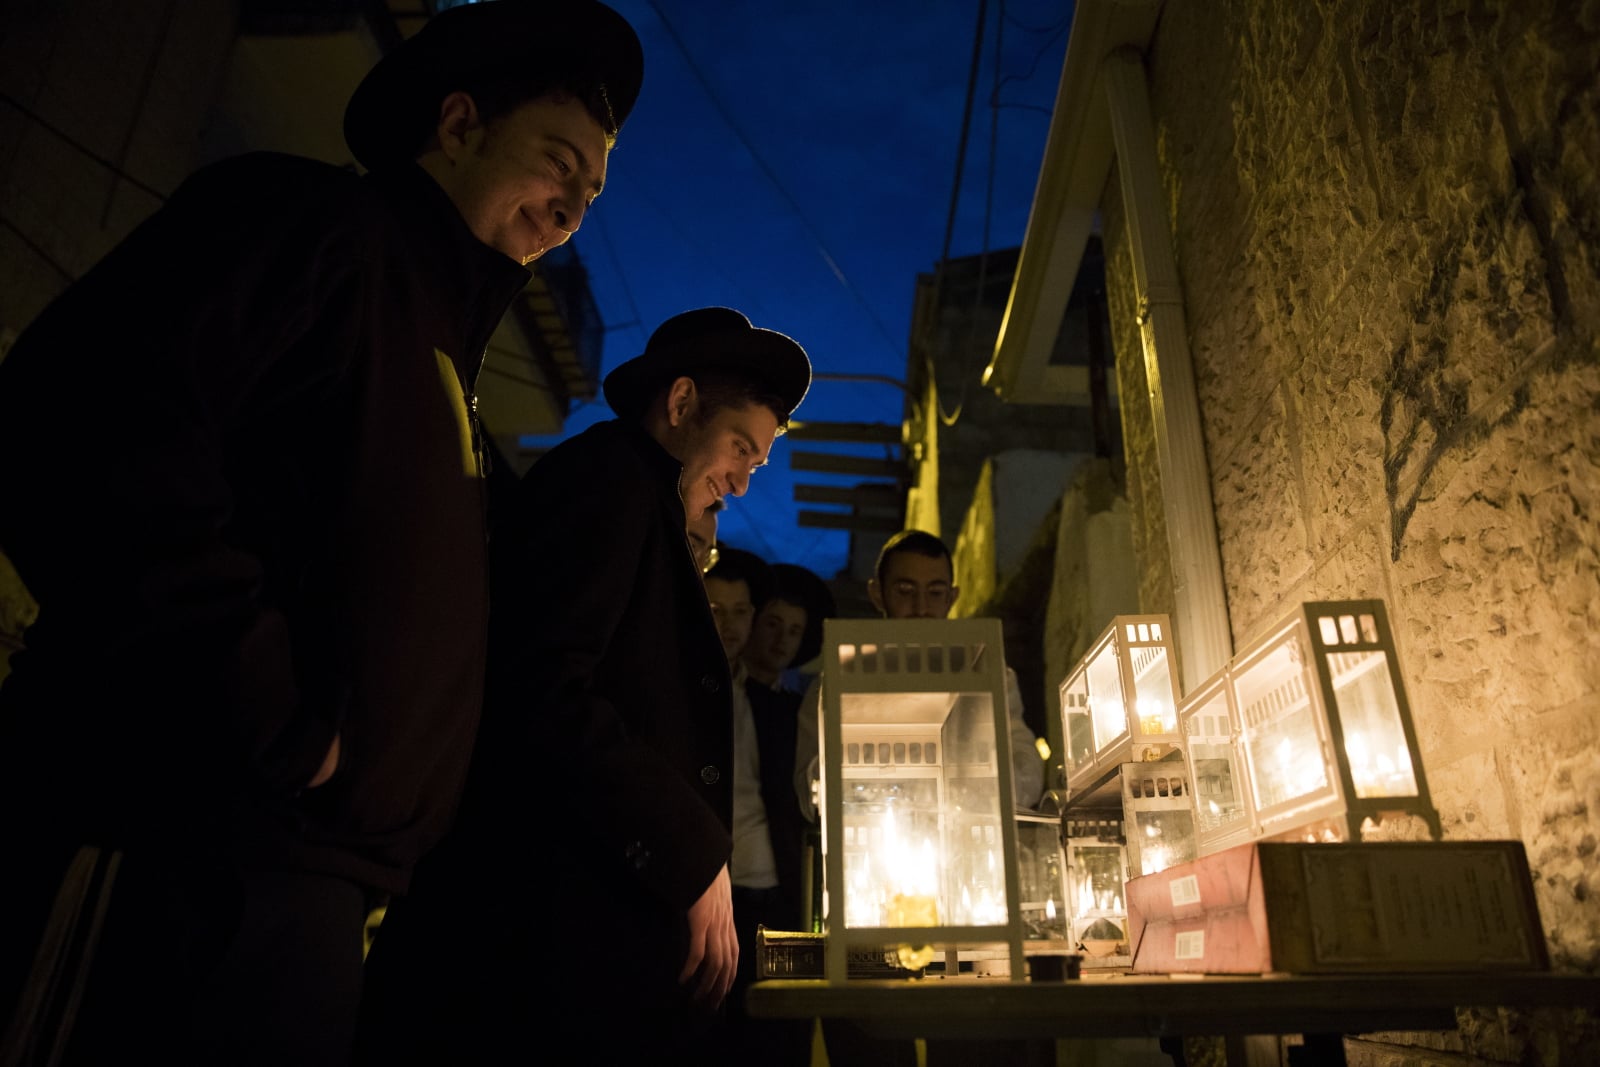 epa07210537 An Ultra-Orthodox Jew lights a Hanukkah candle outside his house during the Jewish holiday of Hanukkah in the Mea Shearim neighbourhood of Jerusalem, Israel, 05 December 2018. Hanukkah, also known as the 'Festival of Lights', is one of the most important Jewish holidays and is celebrated by Jews worldwide. Hanukkah began in the evening of 02 December and ends in the evening of 10 December.  EPA/ABIR SULTAN 
Dostawca: PAP/EPA.